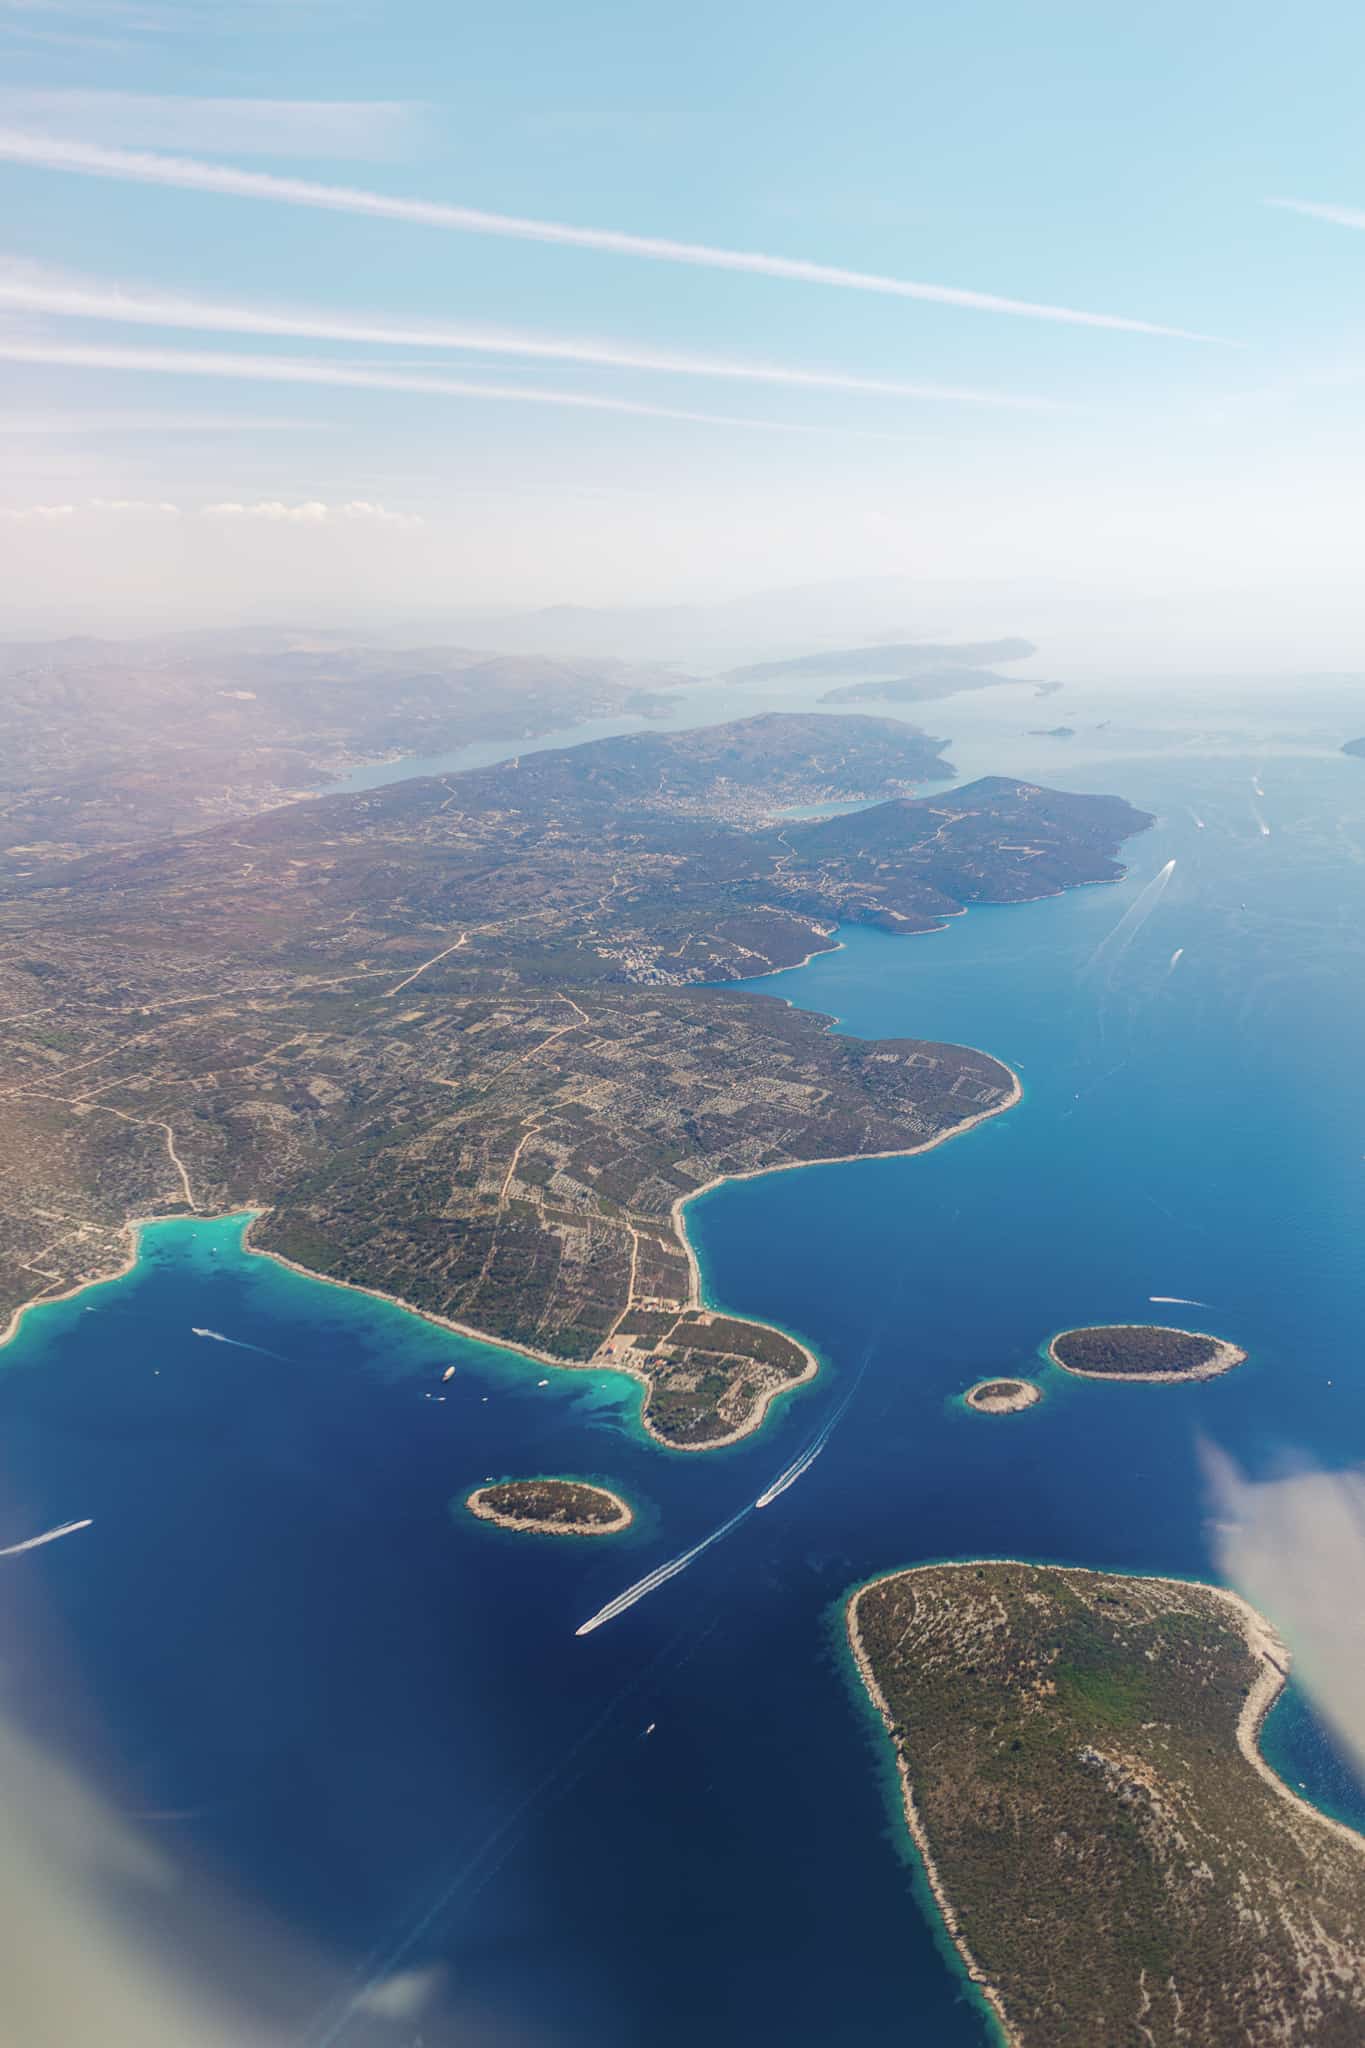 An overhead photo while flying over the Adriatic coast of split Croatia. Boats are driving through the crystal blue water